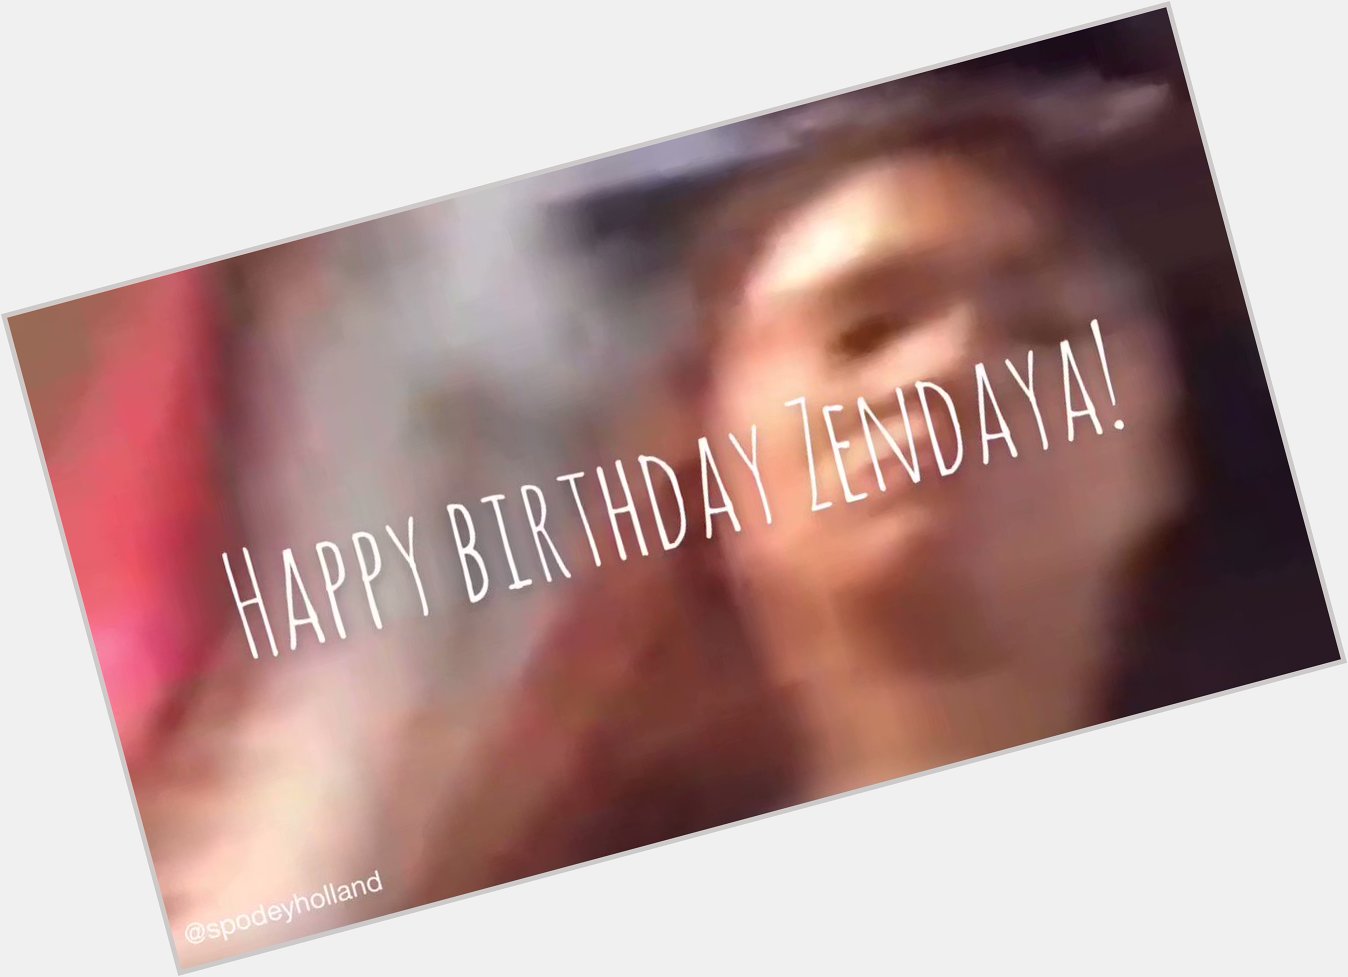 I made this 4 years ago but happy 26th birthday to zendaya. lots of love x 